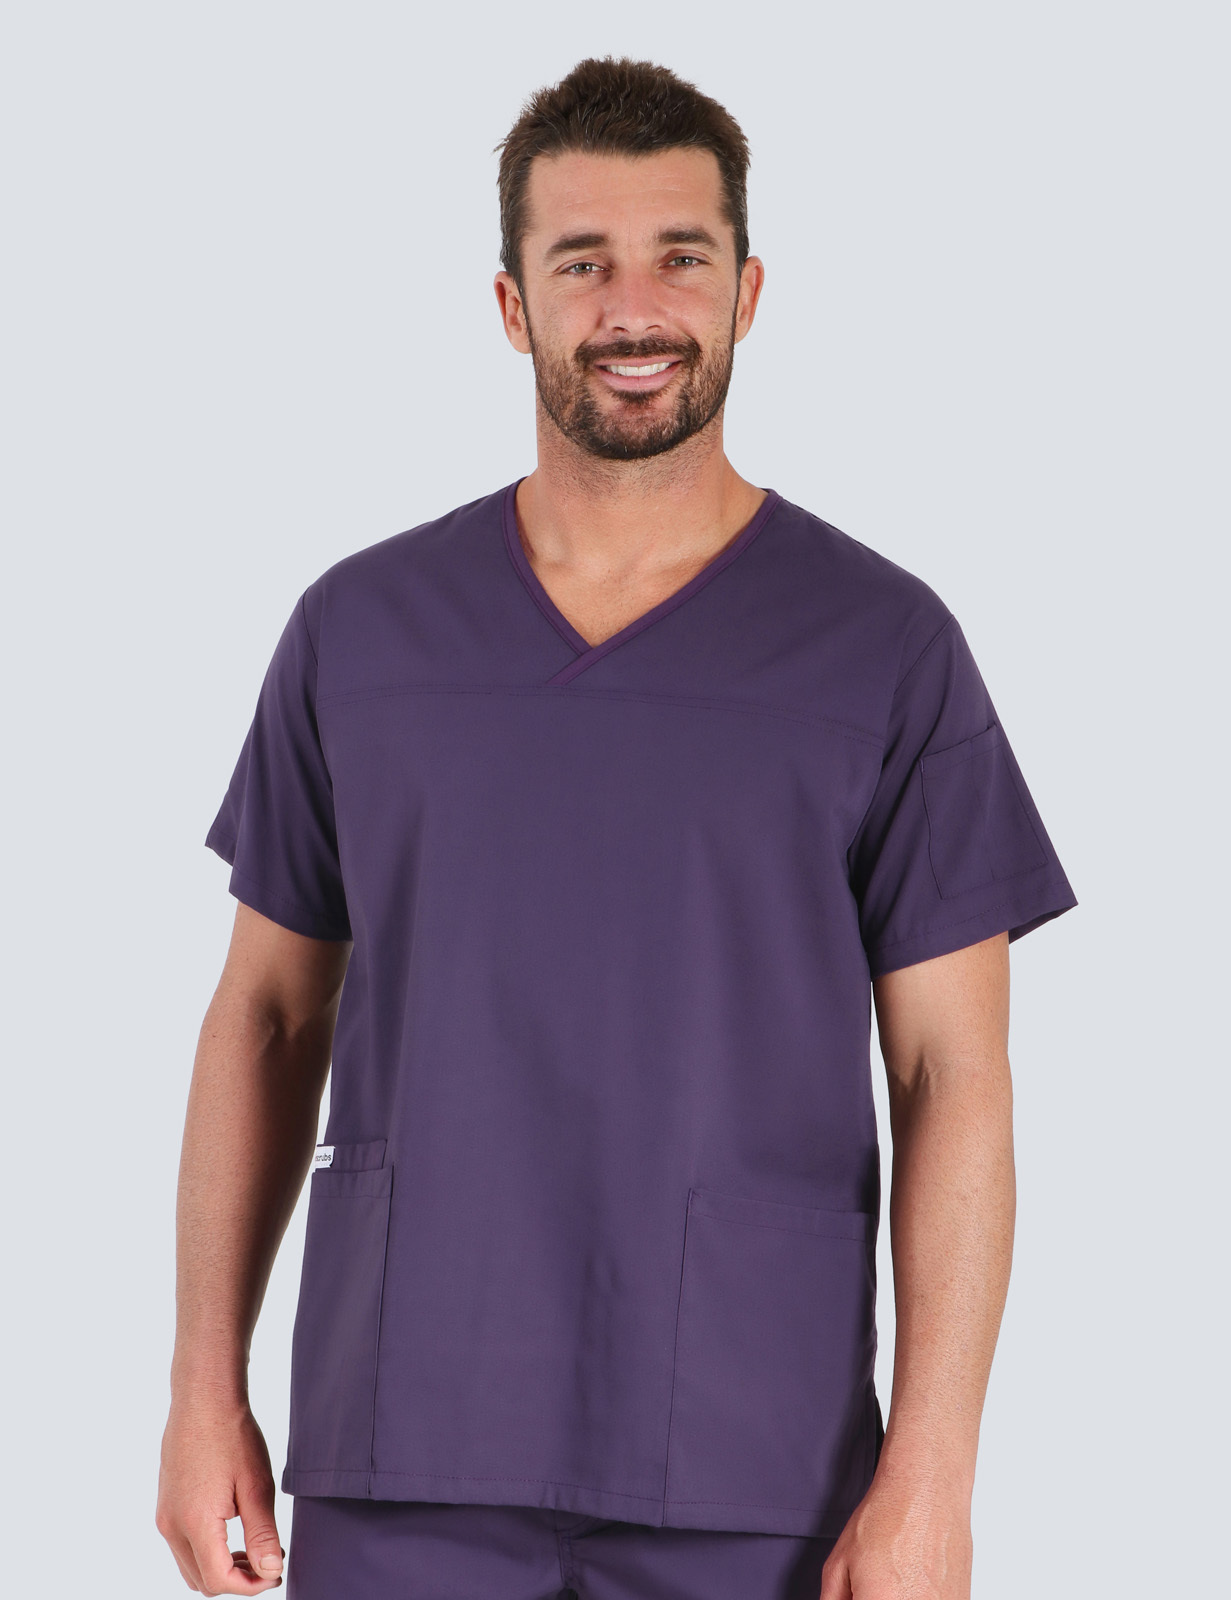 Wollongong Pharmacy (Men's Fit Solid Scrub Top in Aubergine incl Logos)